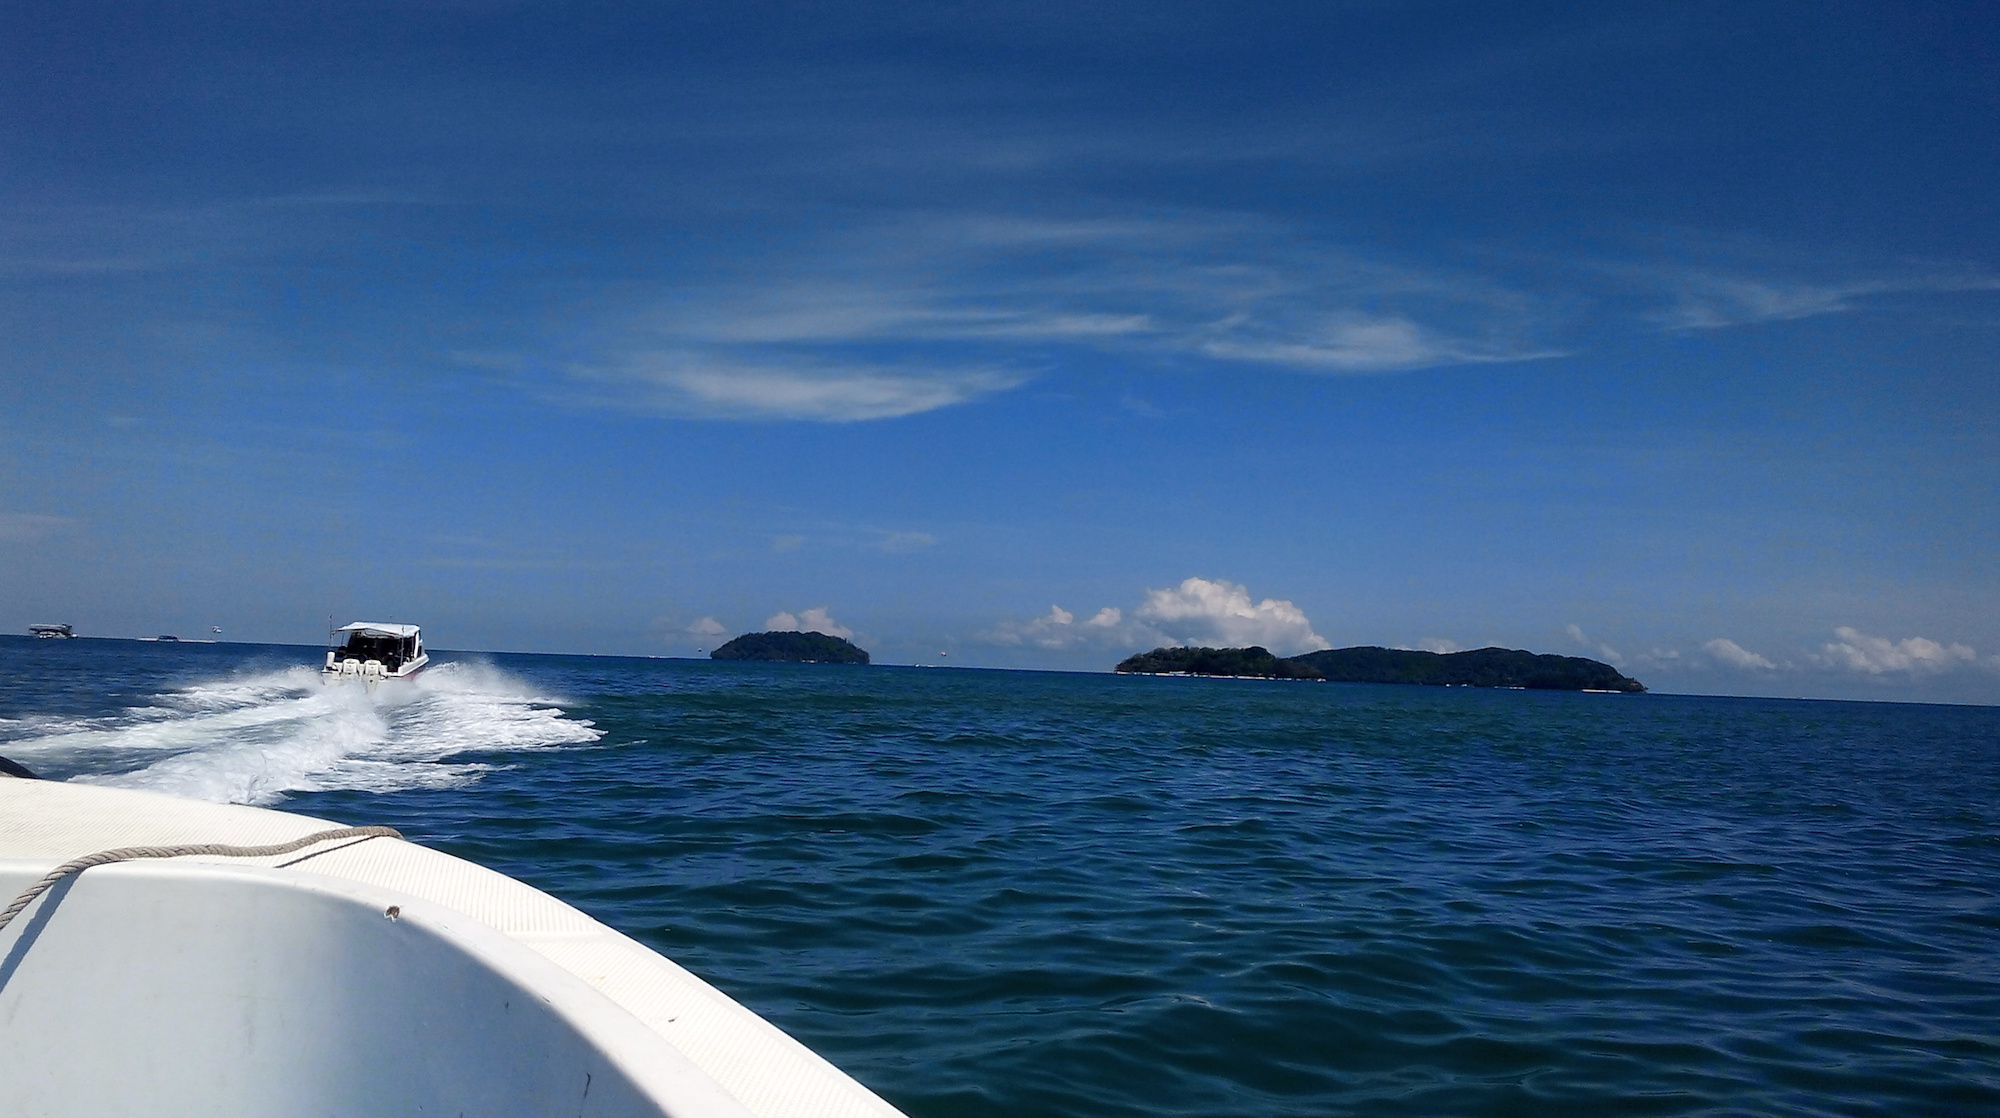 Sabah by boat. Come on in, the water is lovely.